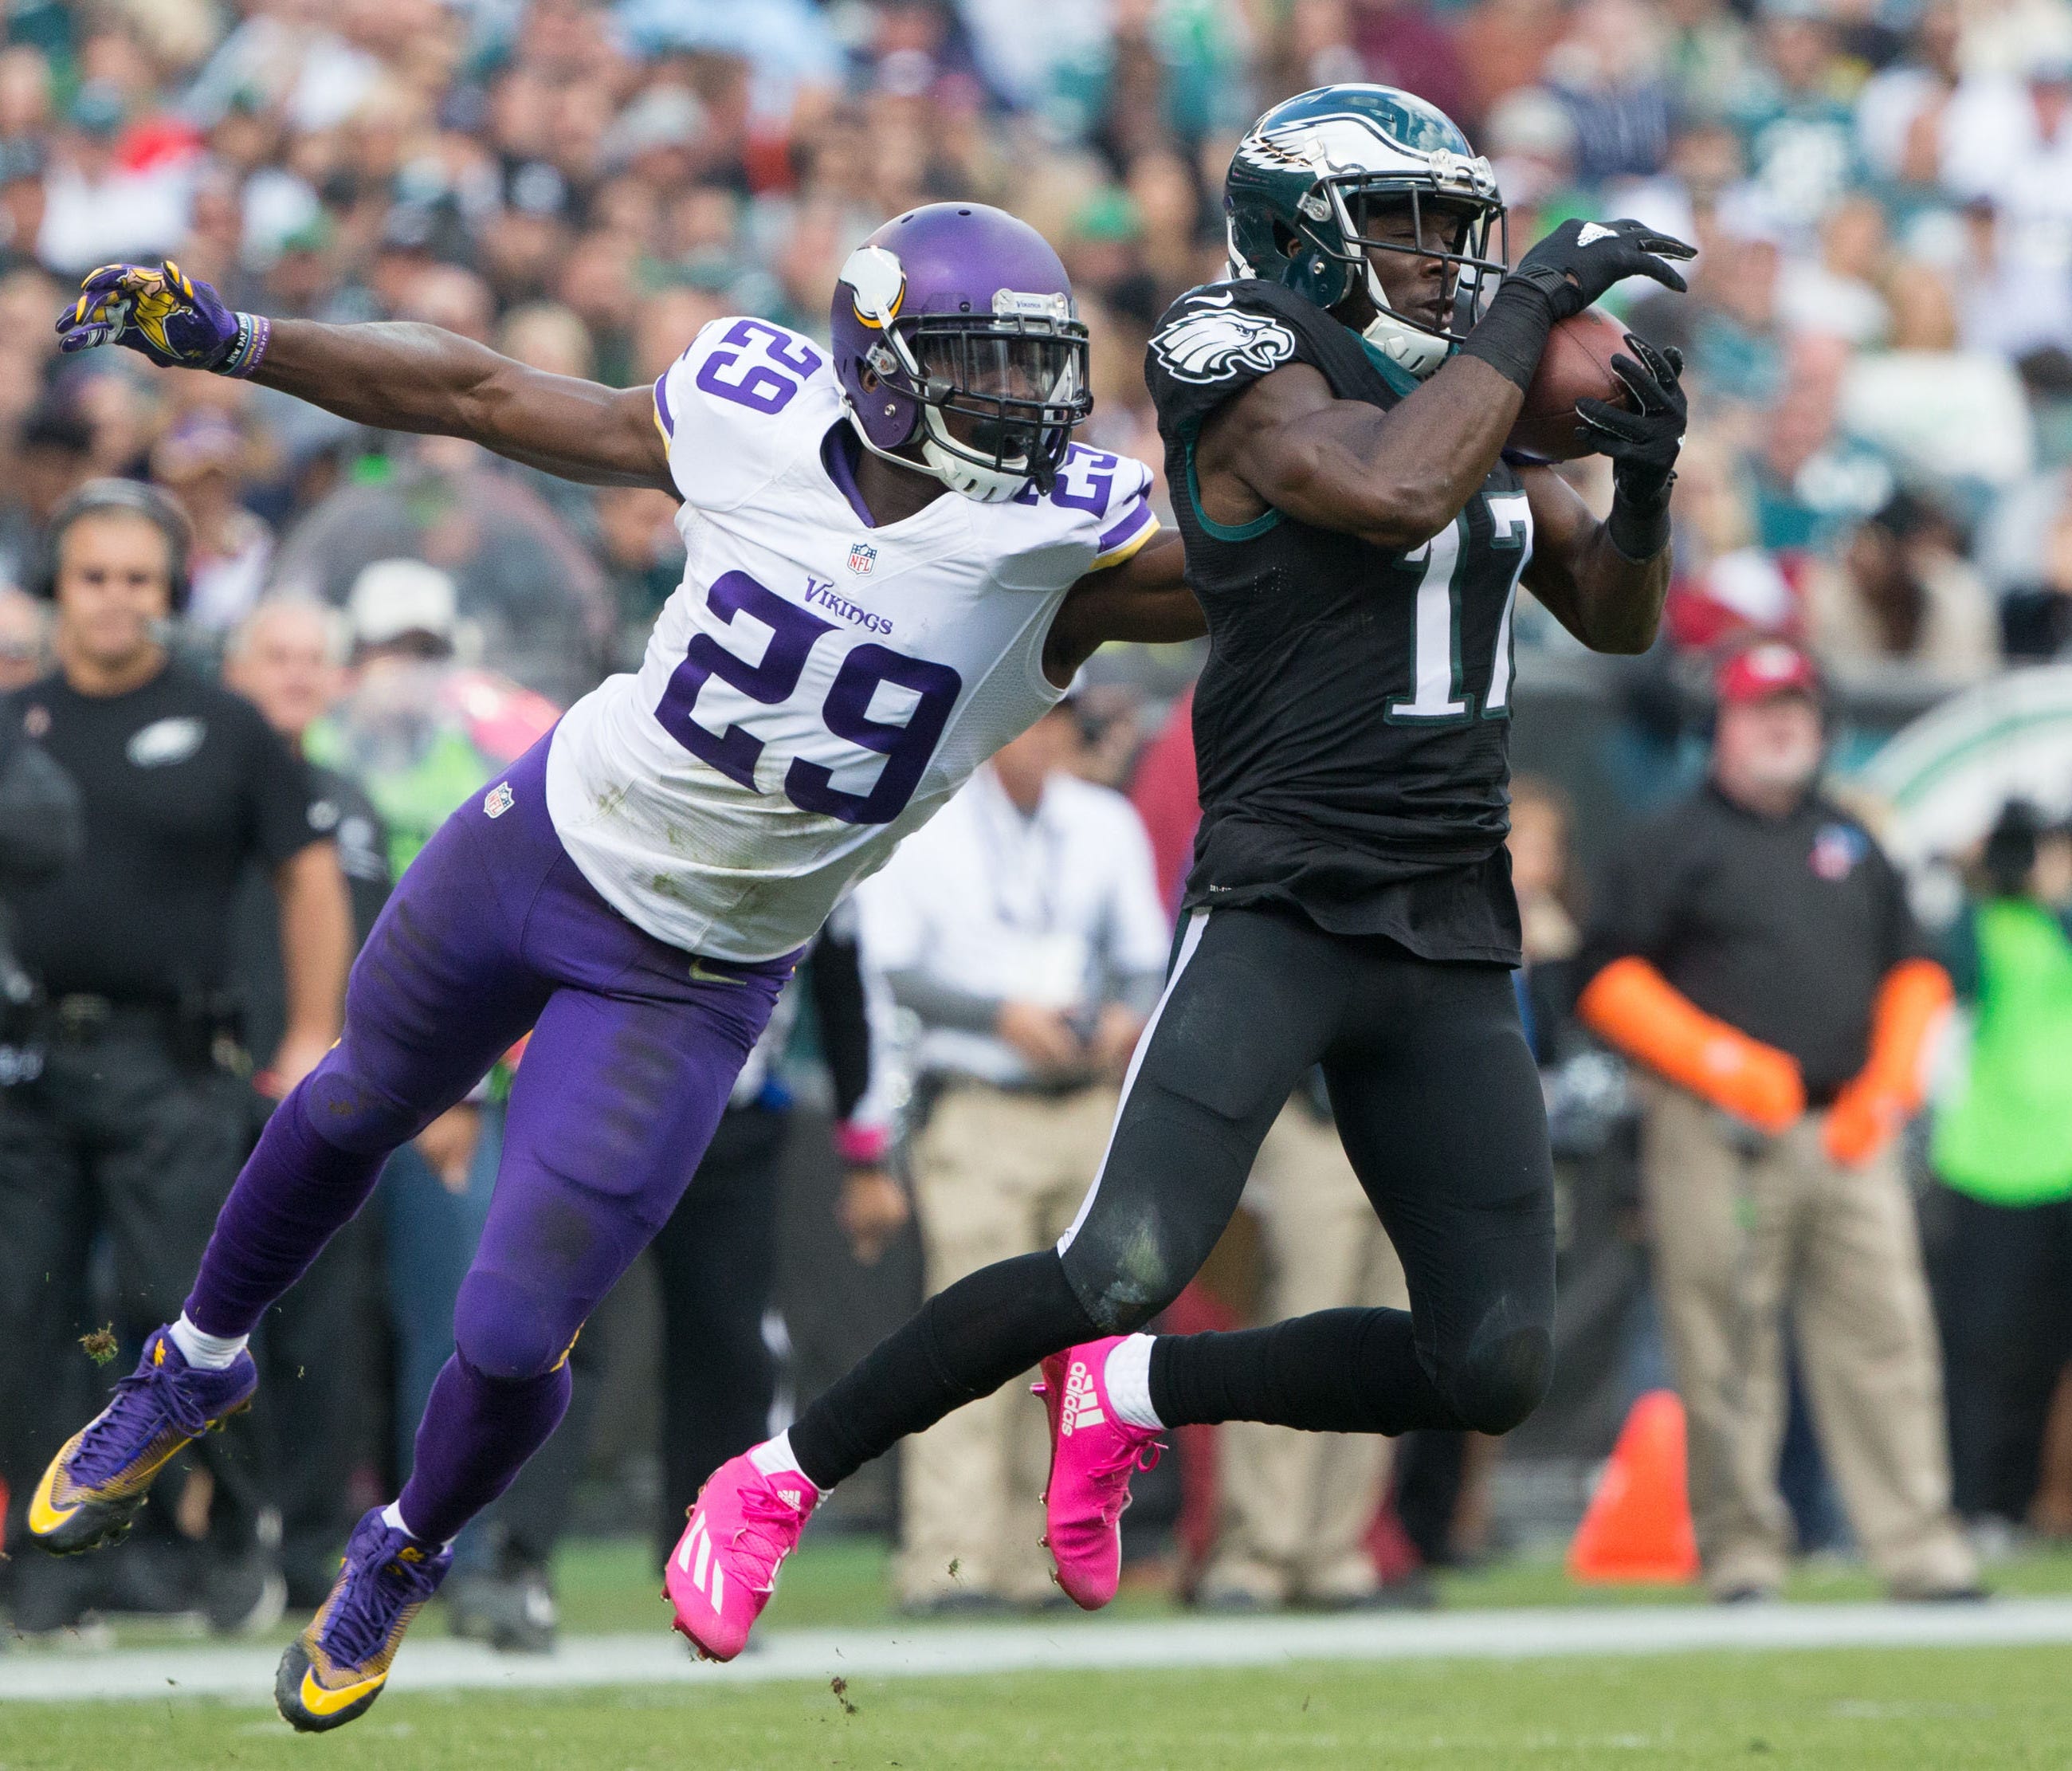 Philadelphia Eagles wide receiver Nelson Agholor (17) makes a reception past Minnesota Vikings cornerback Xavier Rhodes (29) during the first half at Lincoln Financial Field.